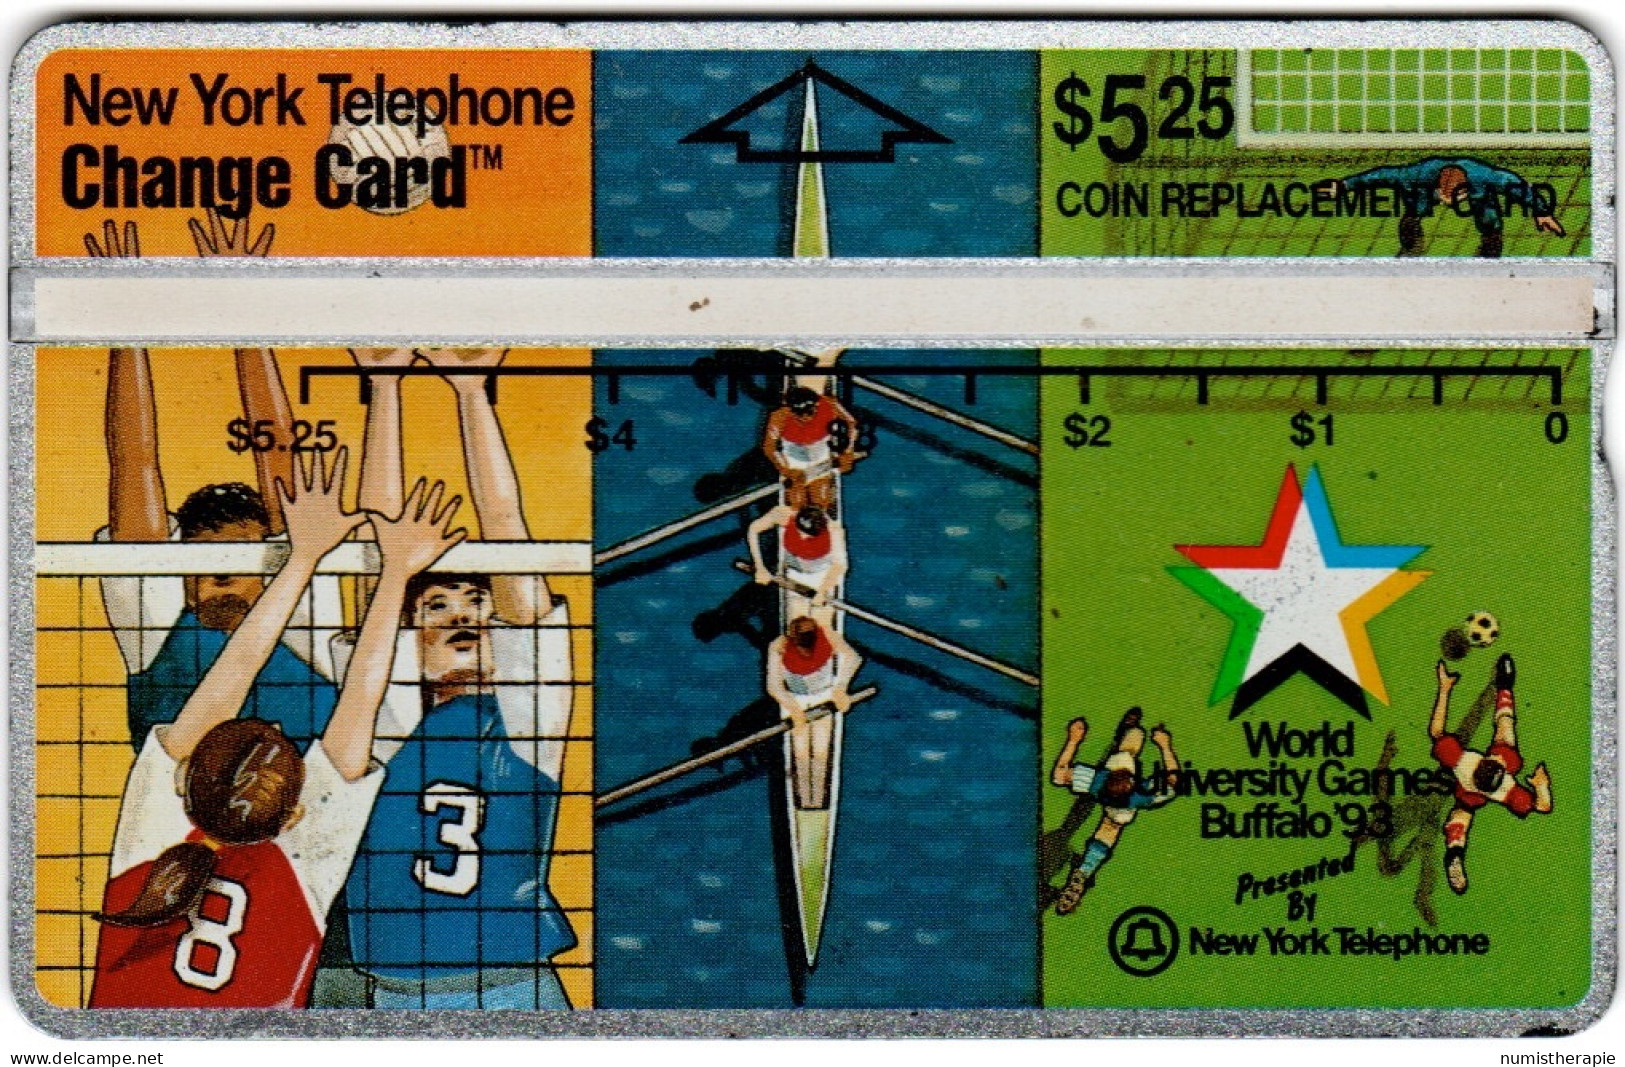 New York Telephone Change Card - Coin Replacement Card 1 : World University Games Buffalo 1993 - [3] Magnetic Cards